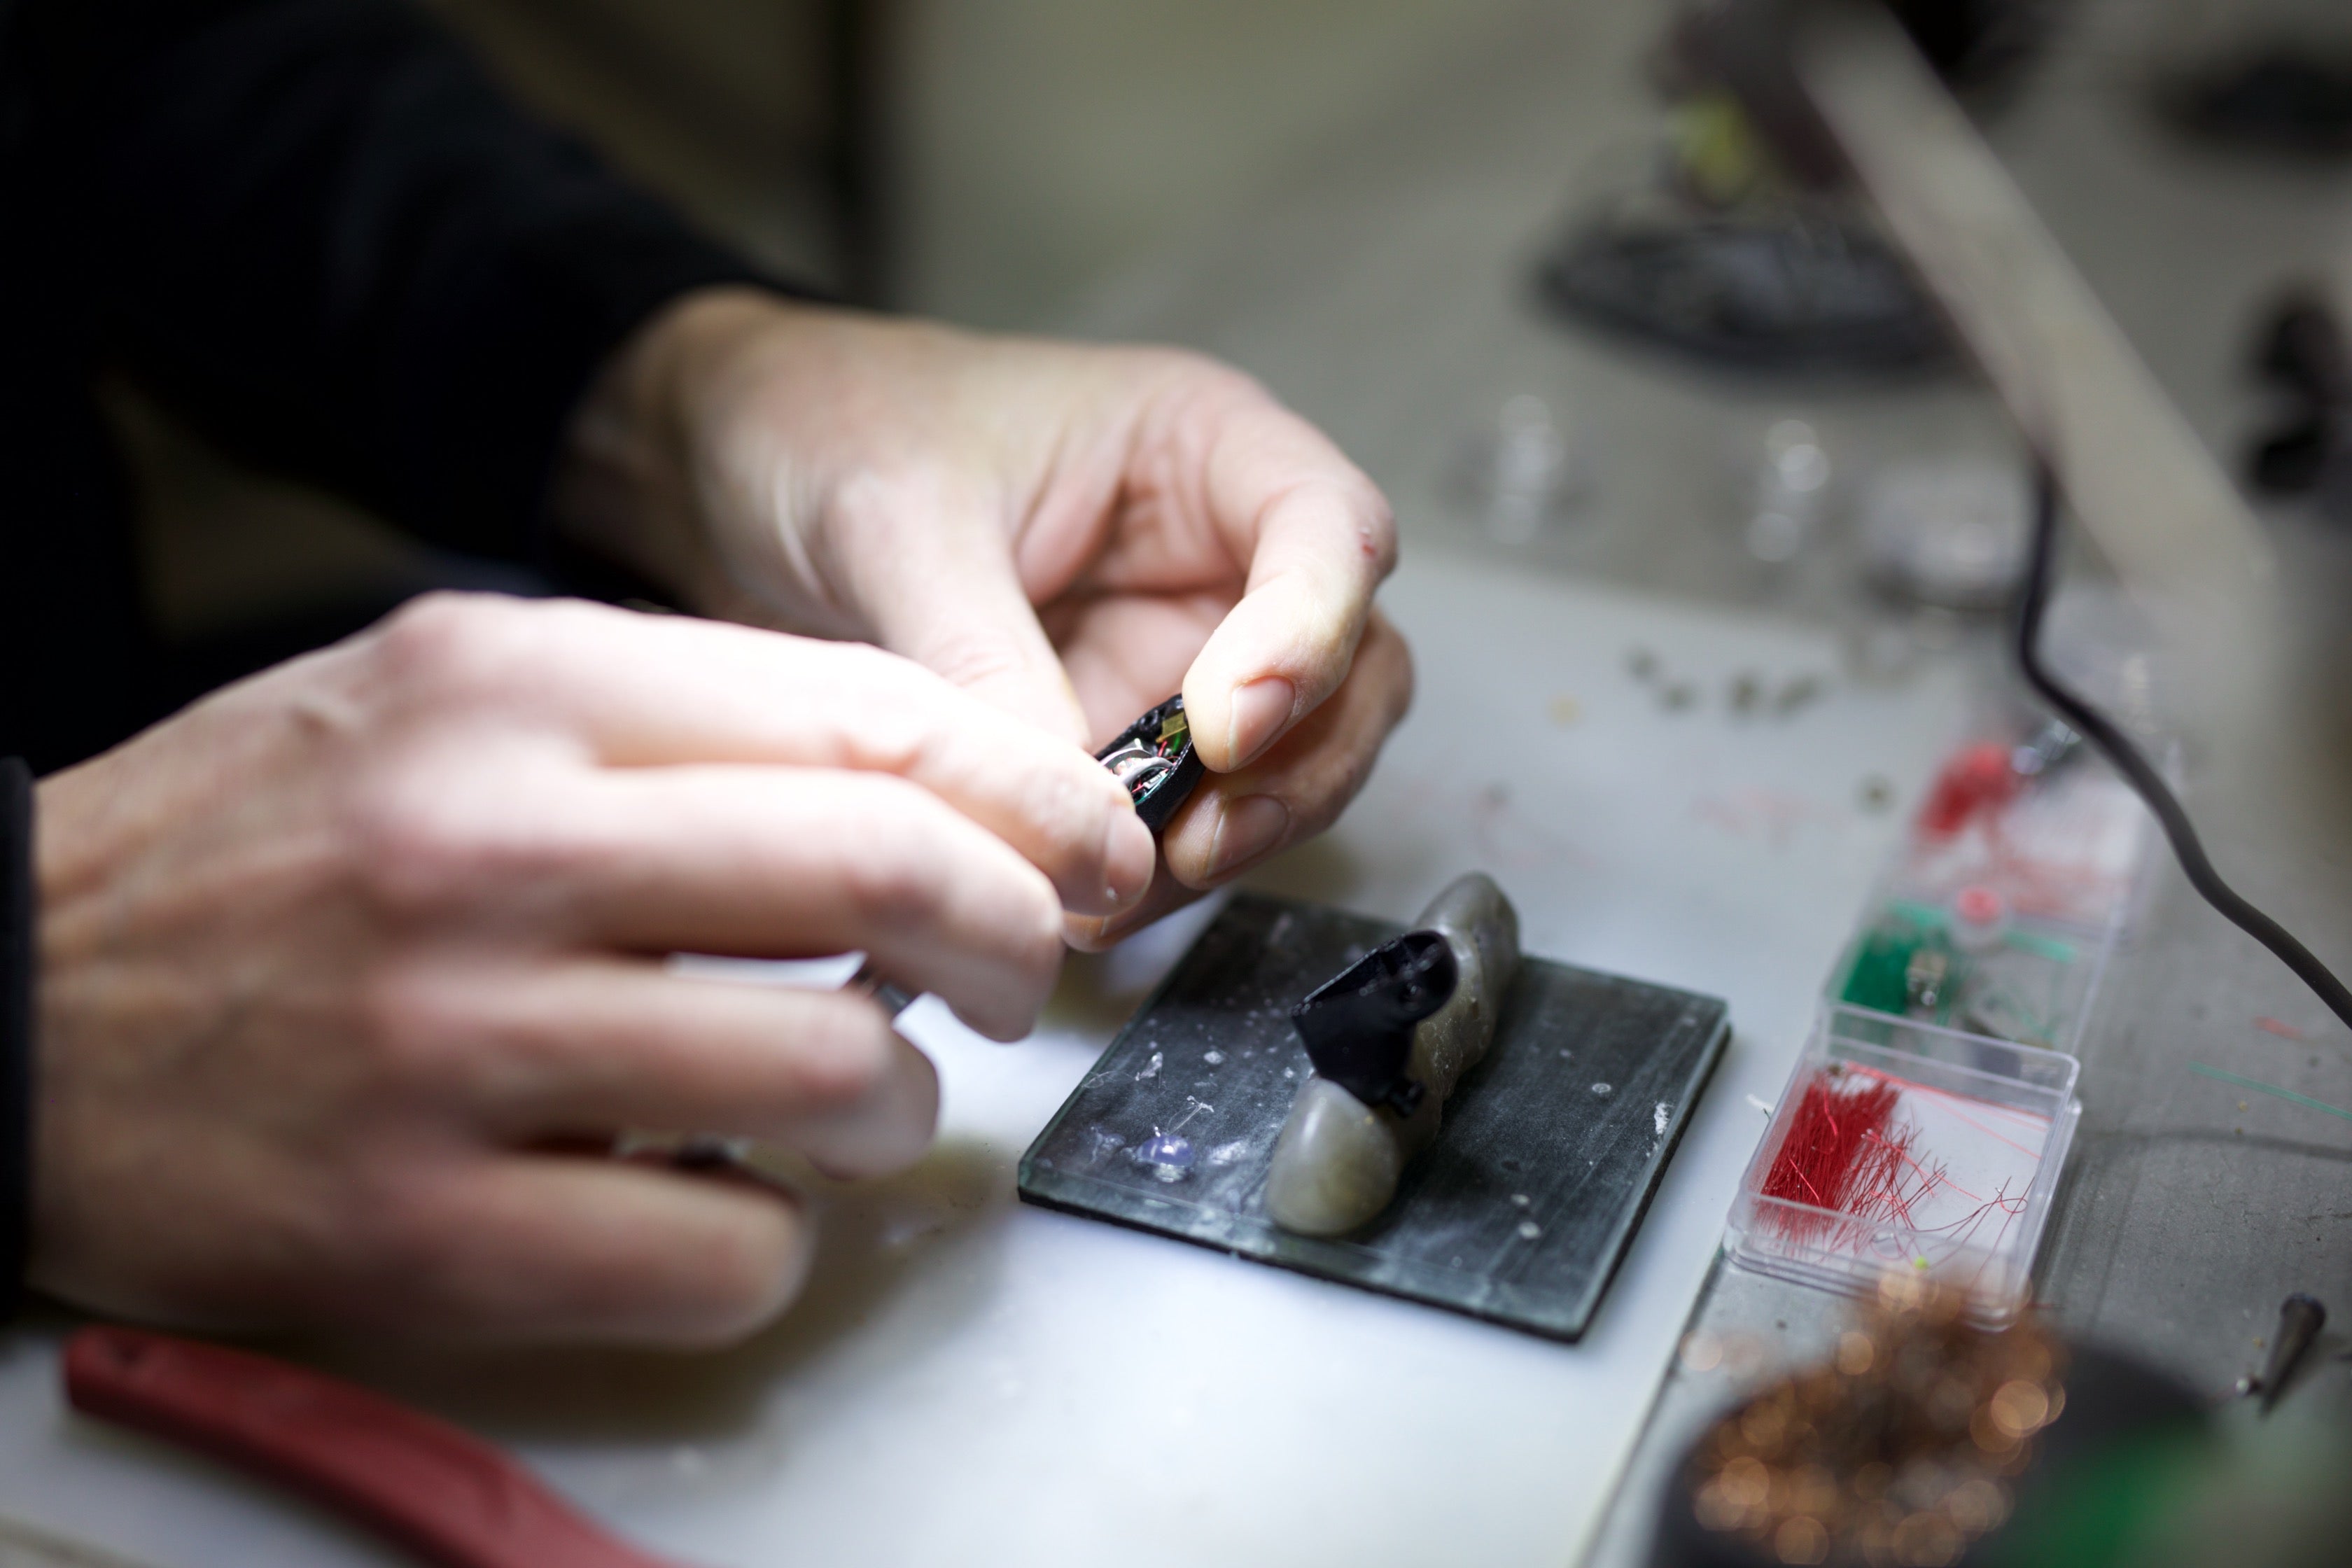 Man's hands building IEMs under a spotlight with small tools surrounding.